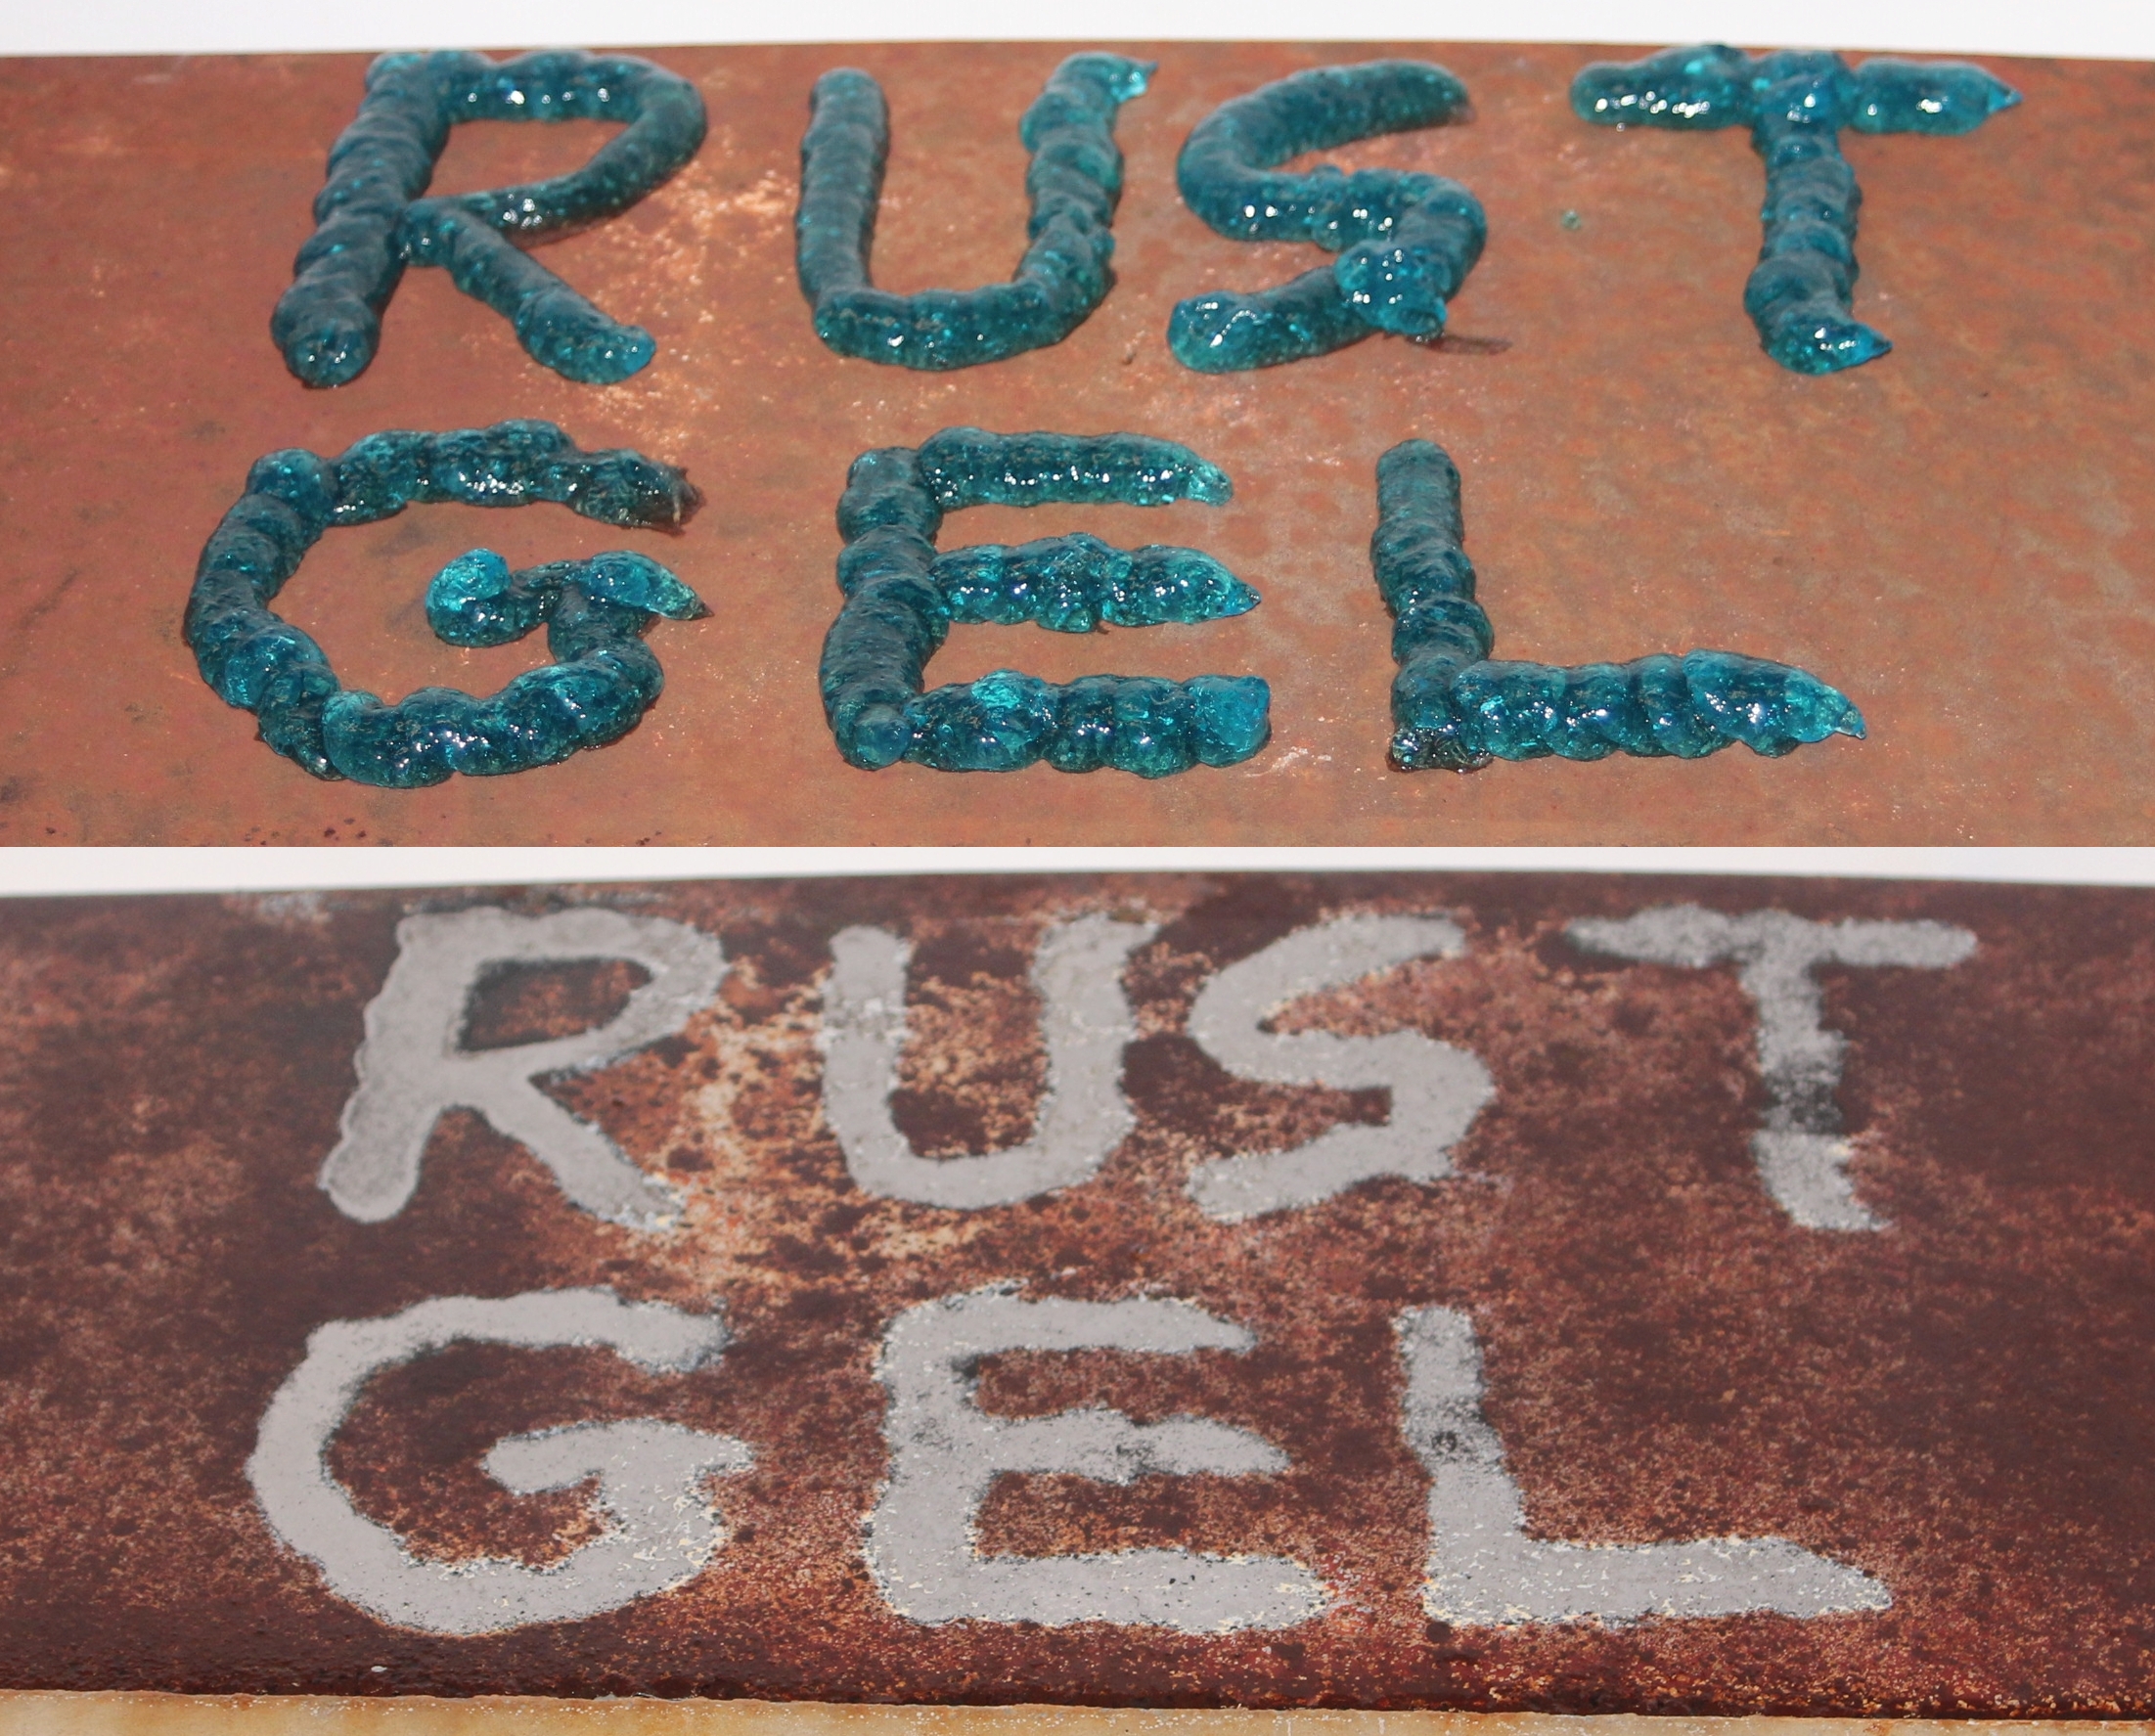 Rusted Solutions Gel removes rust